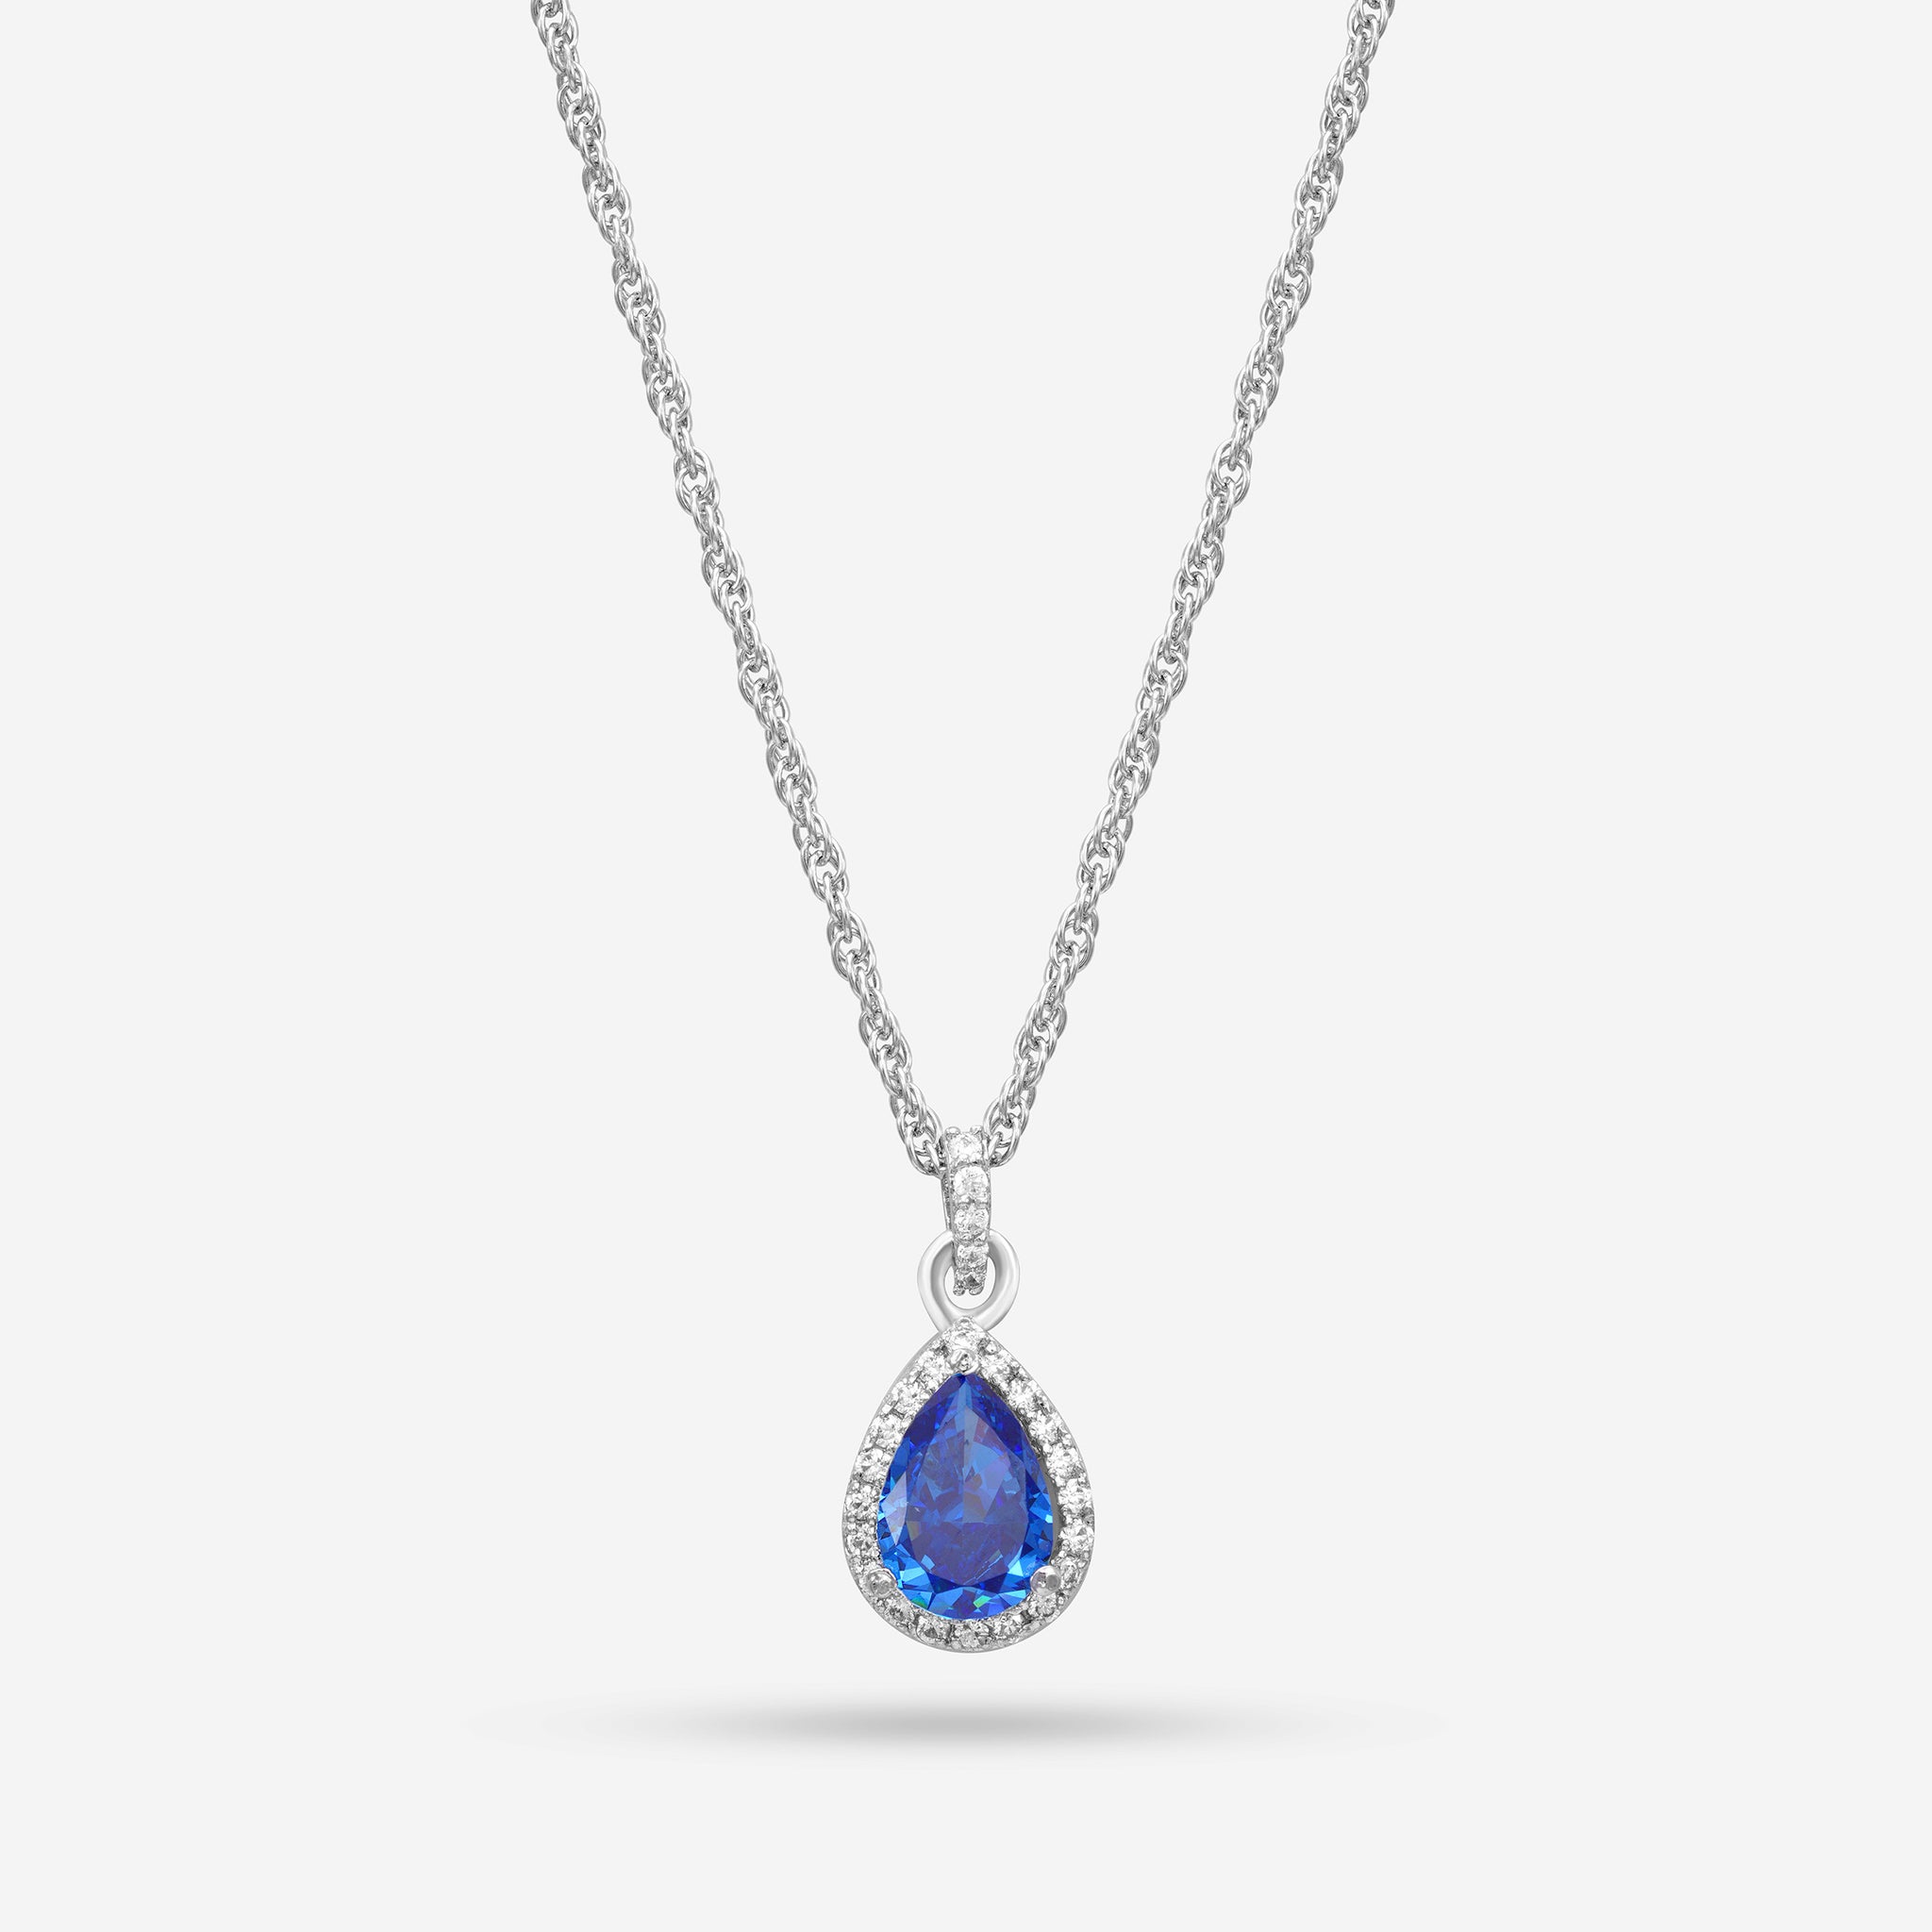 Hale Set Blue Sapphire Teardrop Pear Cut Premium Natural Gemstone 925 Sterling Silver Pendant With Rope Chain